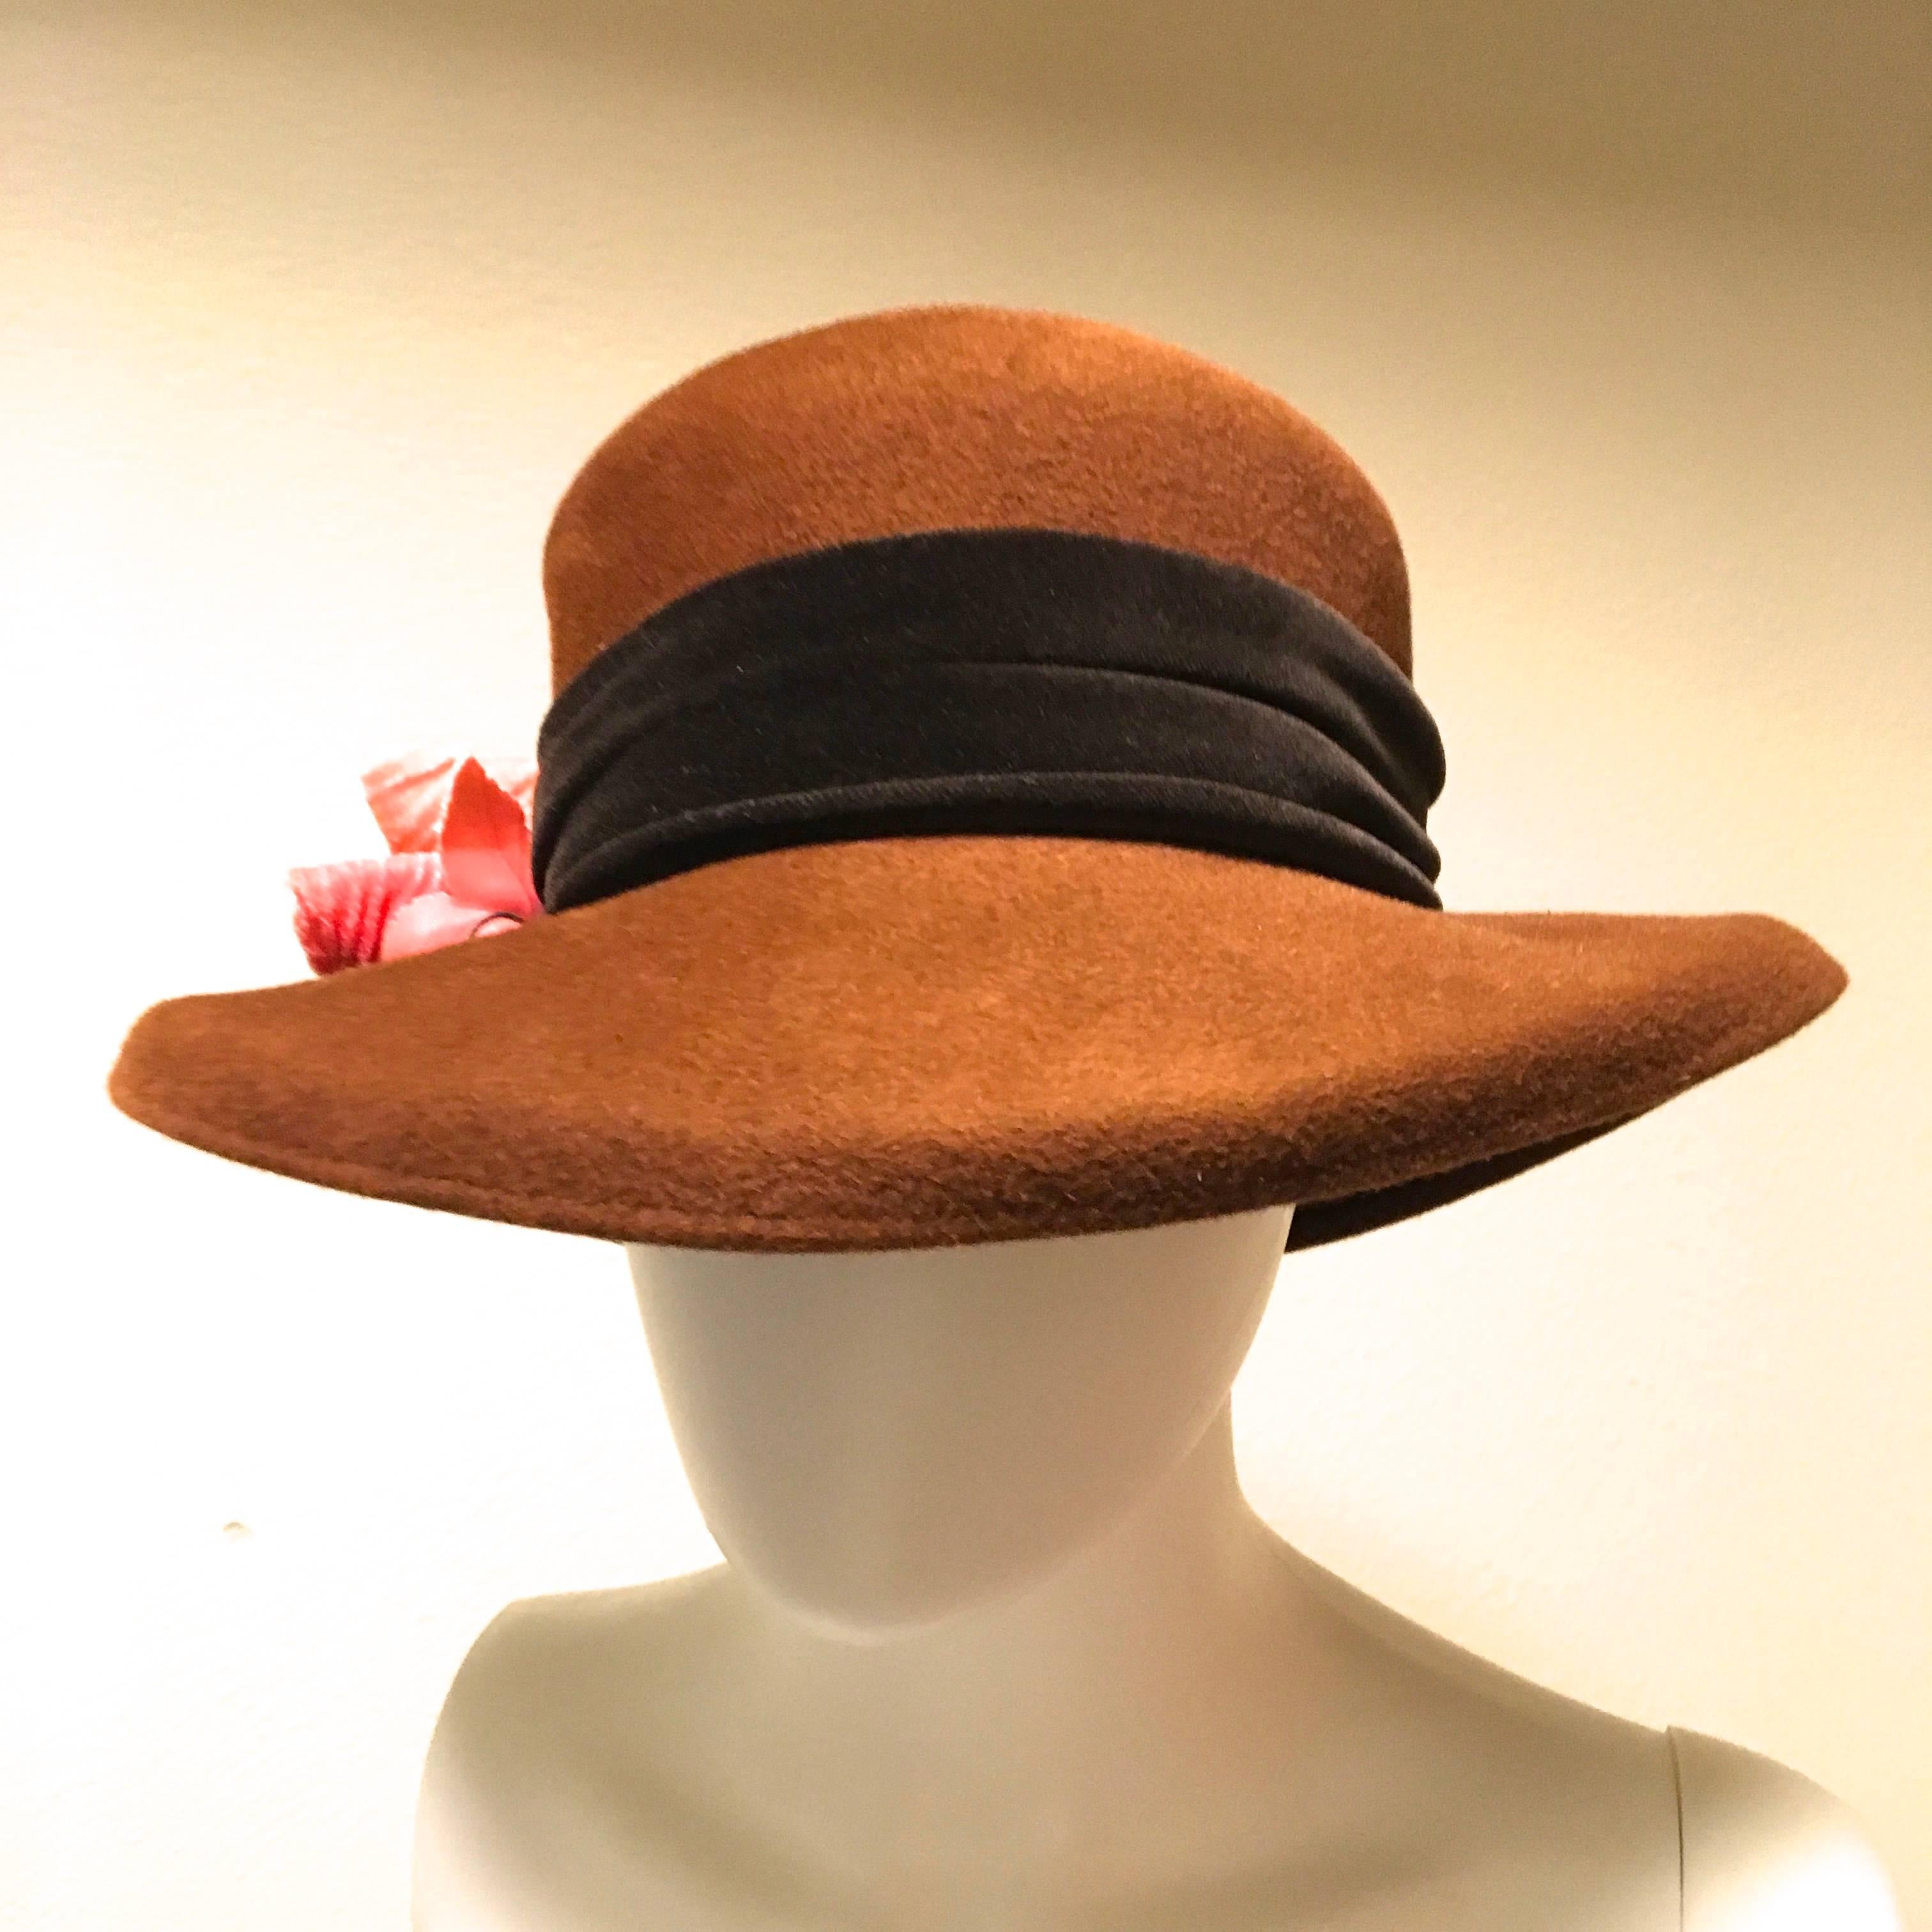 Measurements:

Brim: 3.5 inches wide
Height of Hat: 6.5 inches
Diameter of Inside of Hat:  6.5 inches

Hat by Philip Treacy for Saks Fifth Avenue